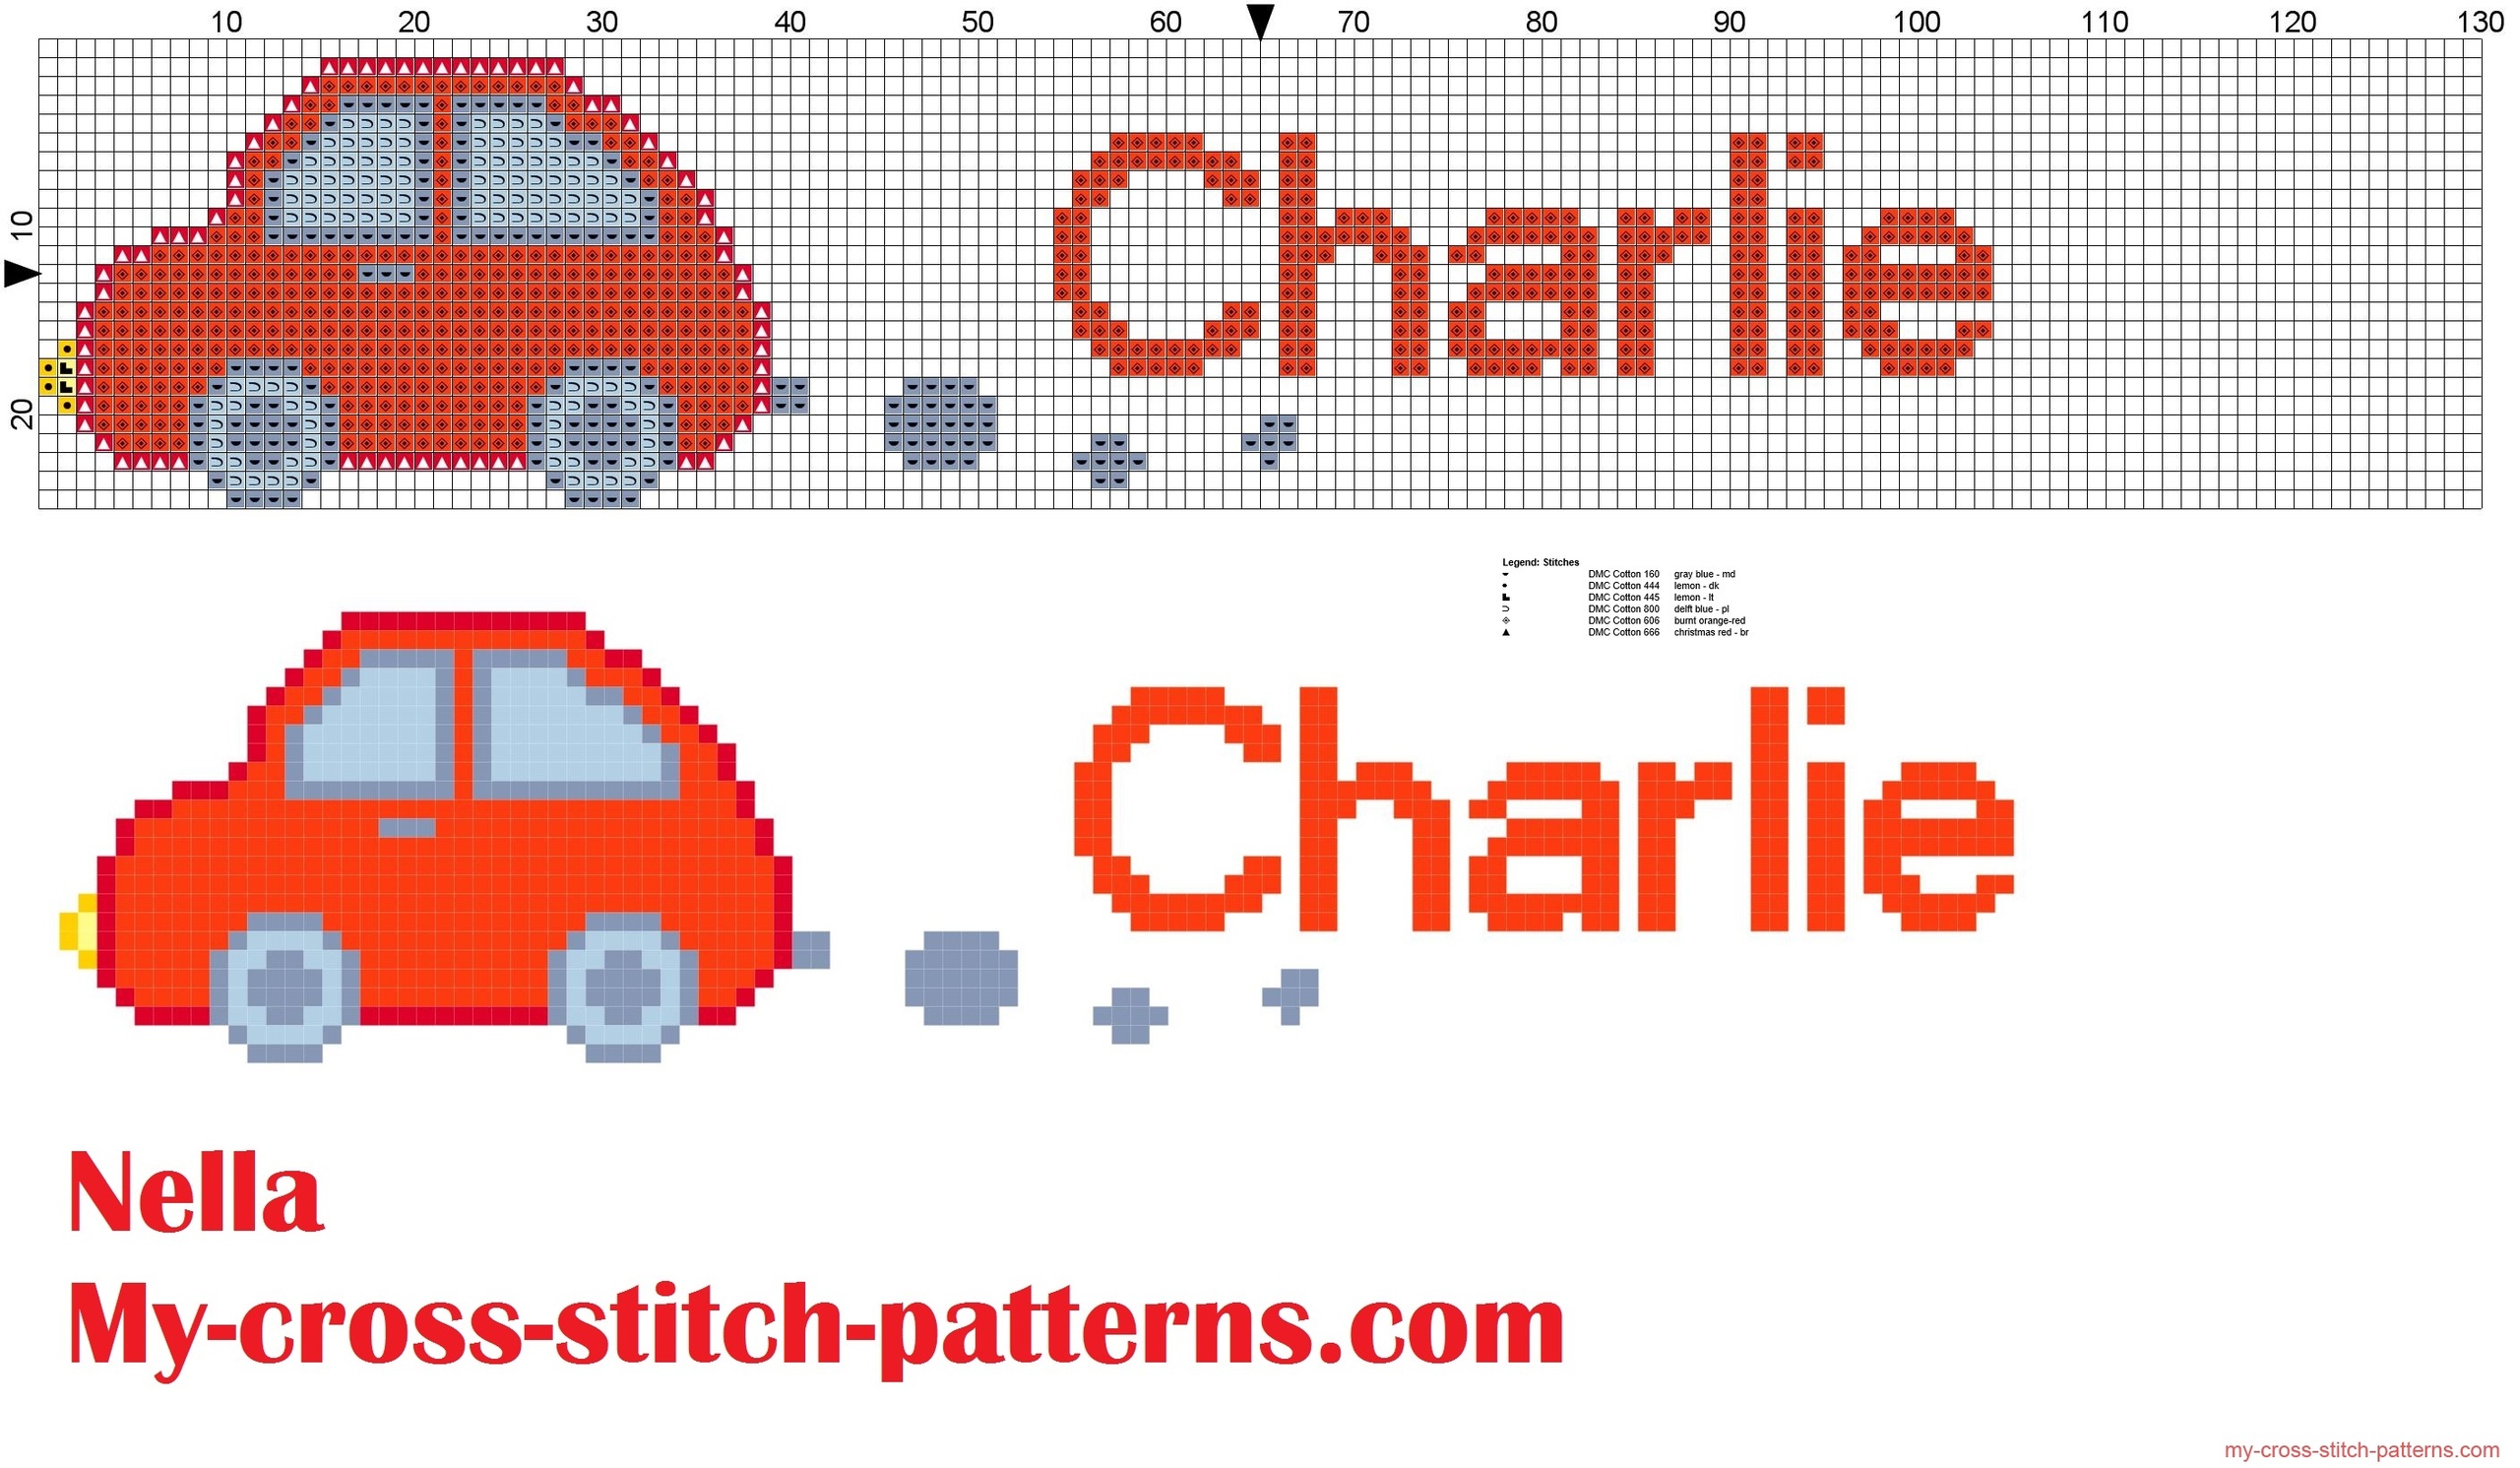 charlie_name_with_toy_car_cross_stitch_patterns